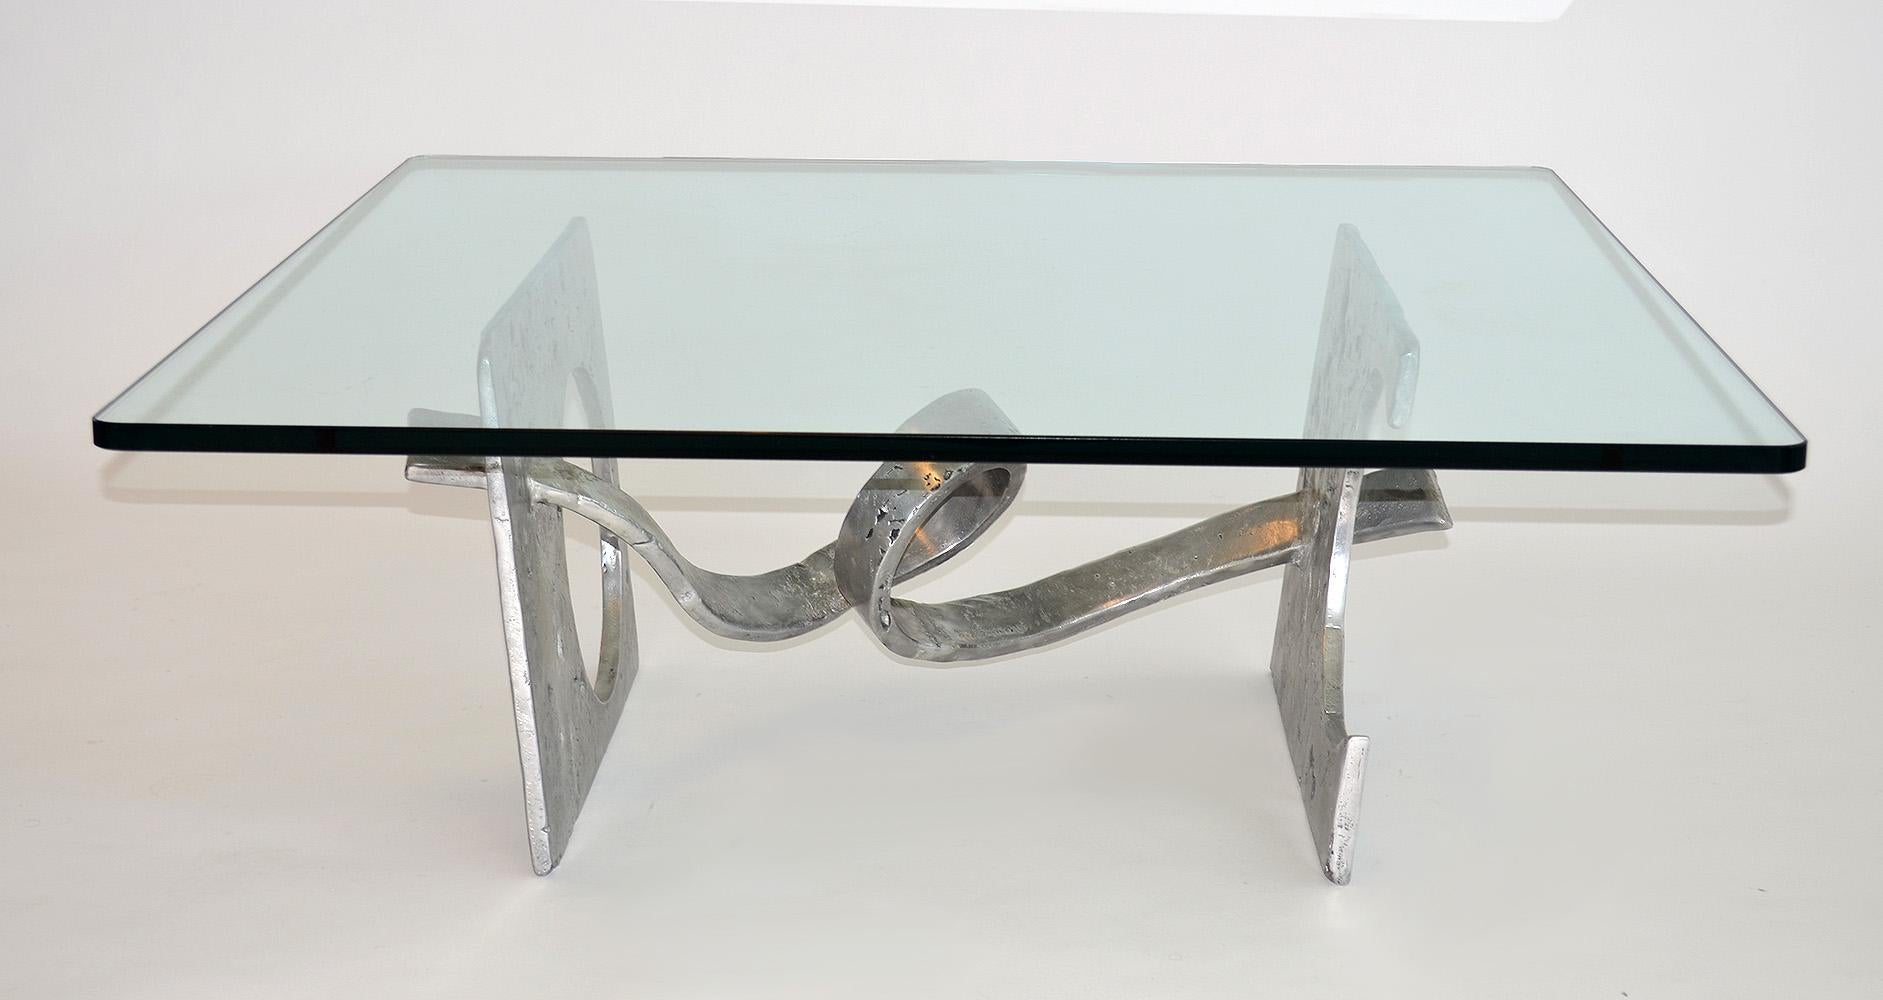 Modern Signed Silas Seandel 'Knot' Cocktail Aluminum Coffee Table USA, 1970's For Sale